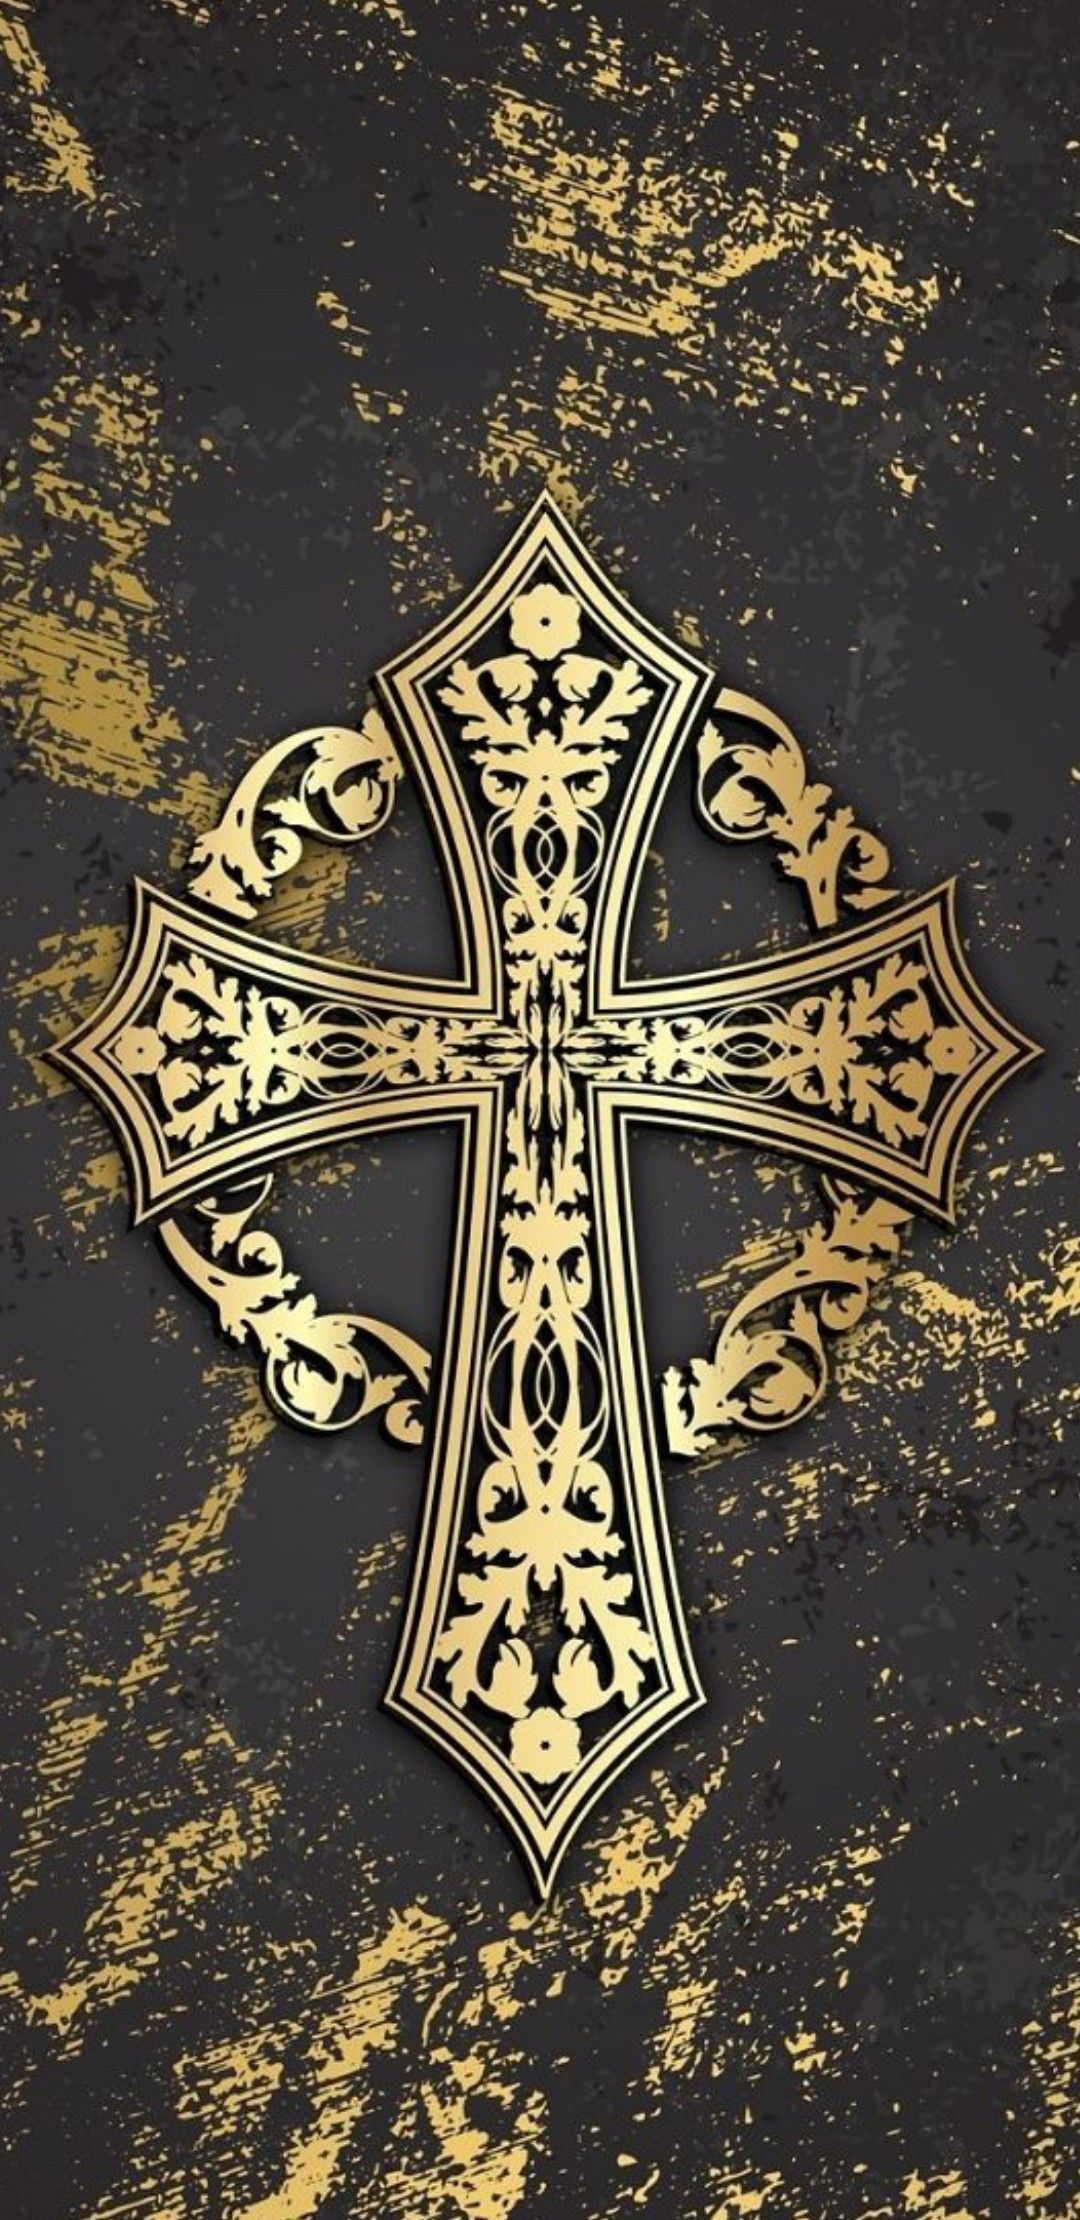 Cross Wallpaper ideas. cross wallpaper, wallpaper, cross picture